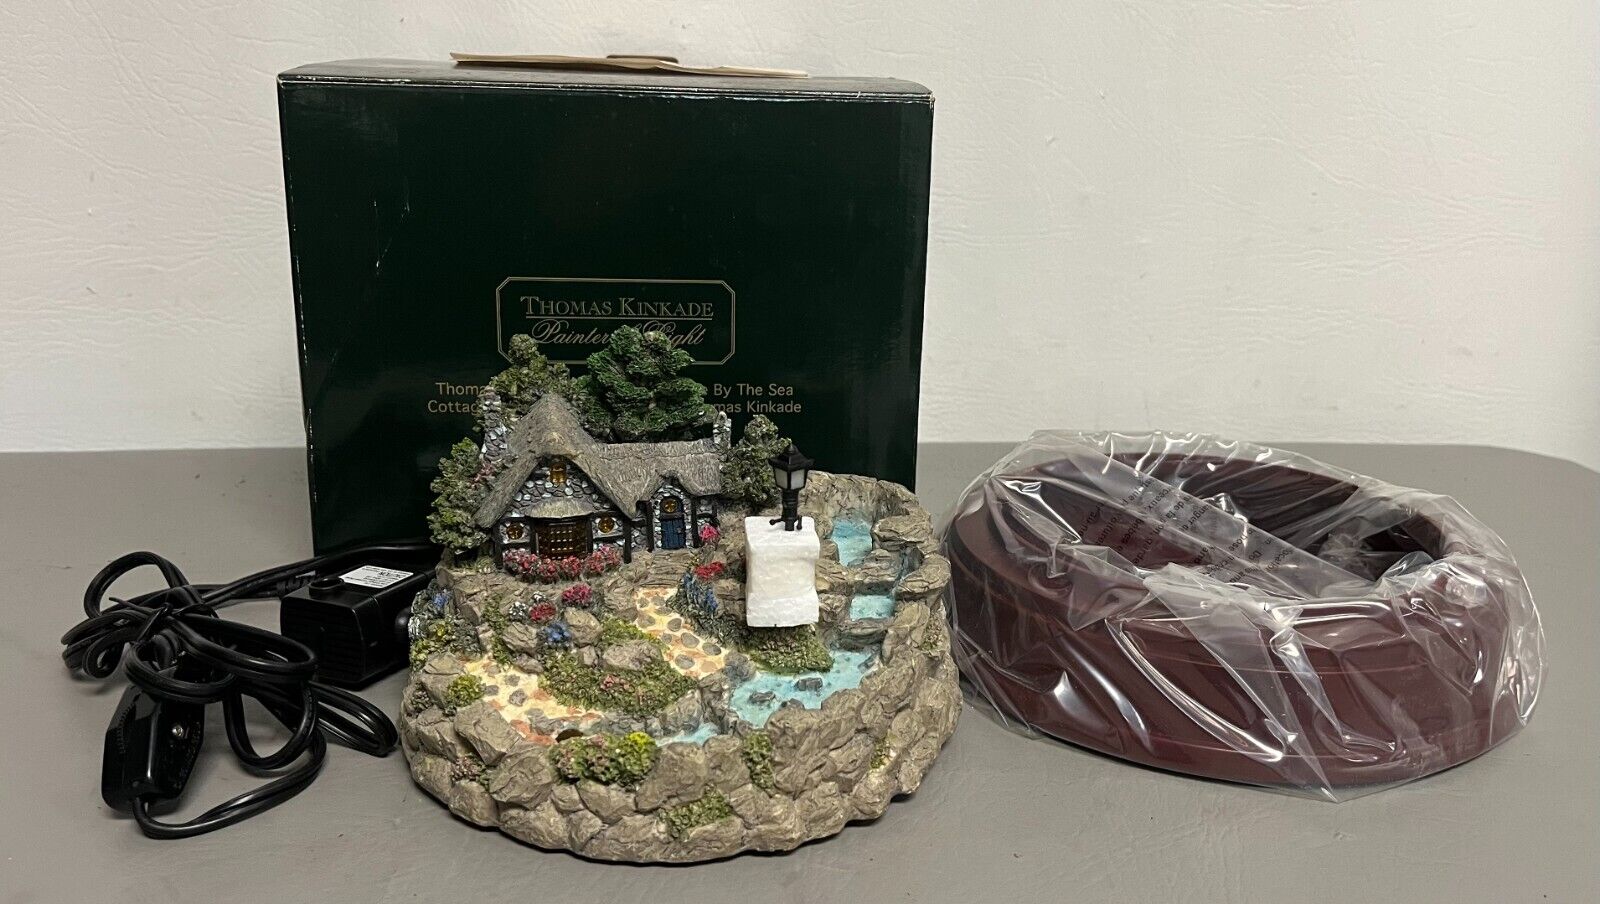 Thomas Kinkade Waterfall Cottage by the Sea Sculpture - NEW - Open Box